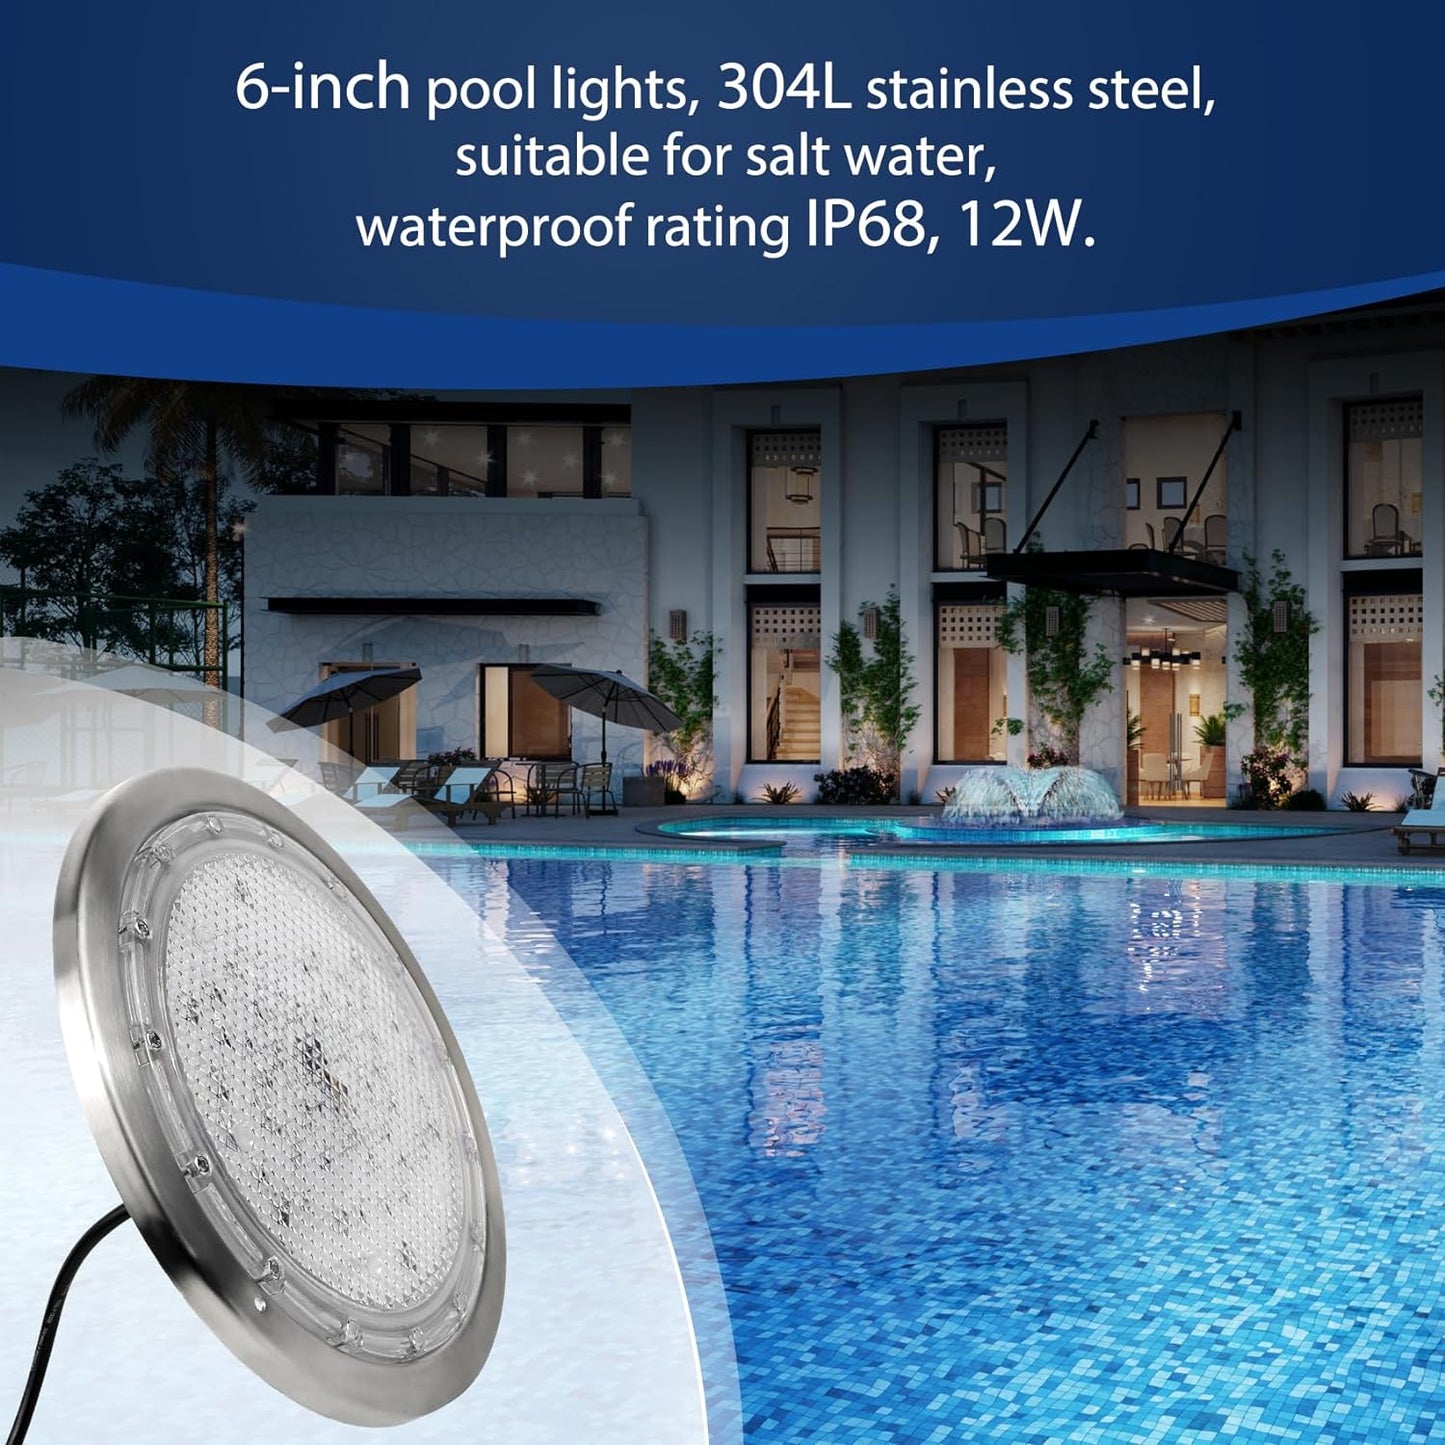 LED RGBW 6 Inch 12V AC Pool Lights for Inground Pool,  100 Foot Cord, w/Remote, Salt/Freshwater Compatible